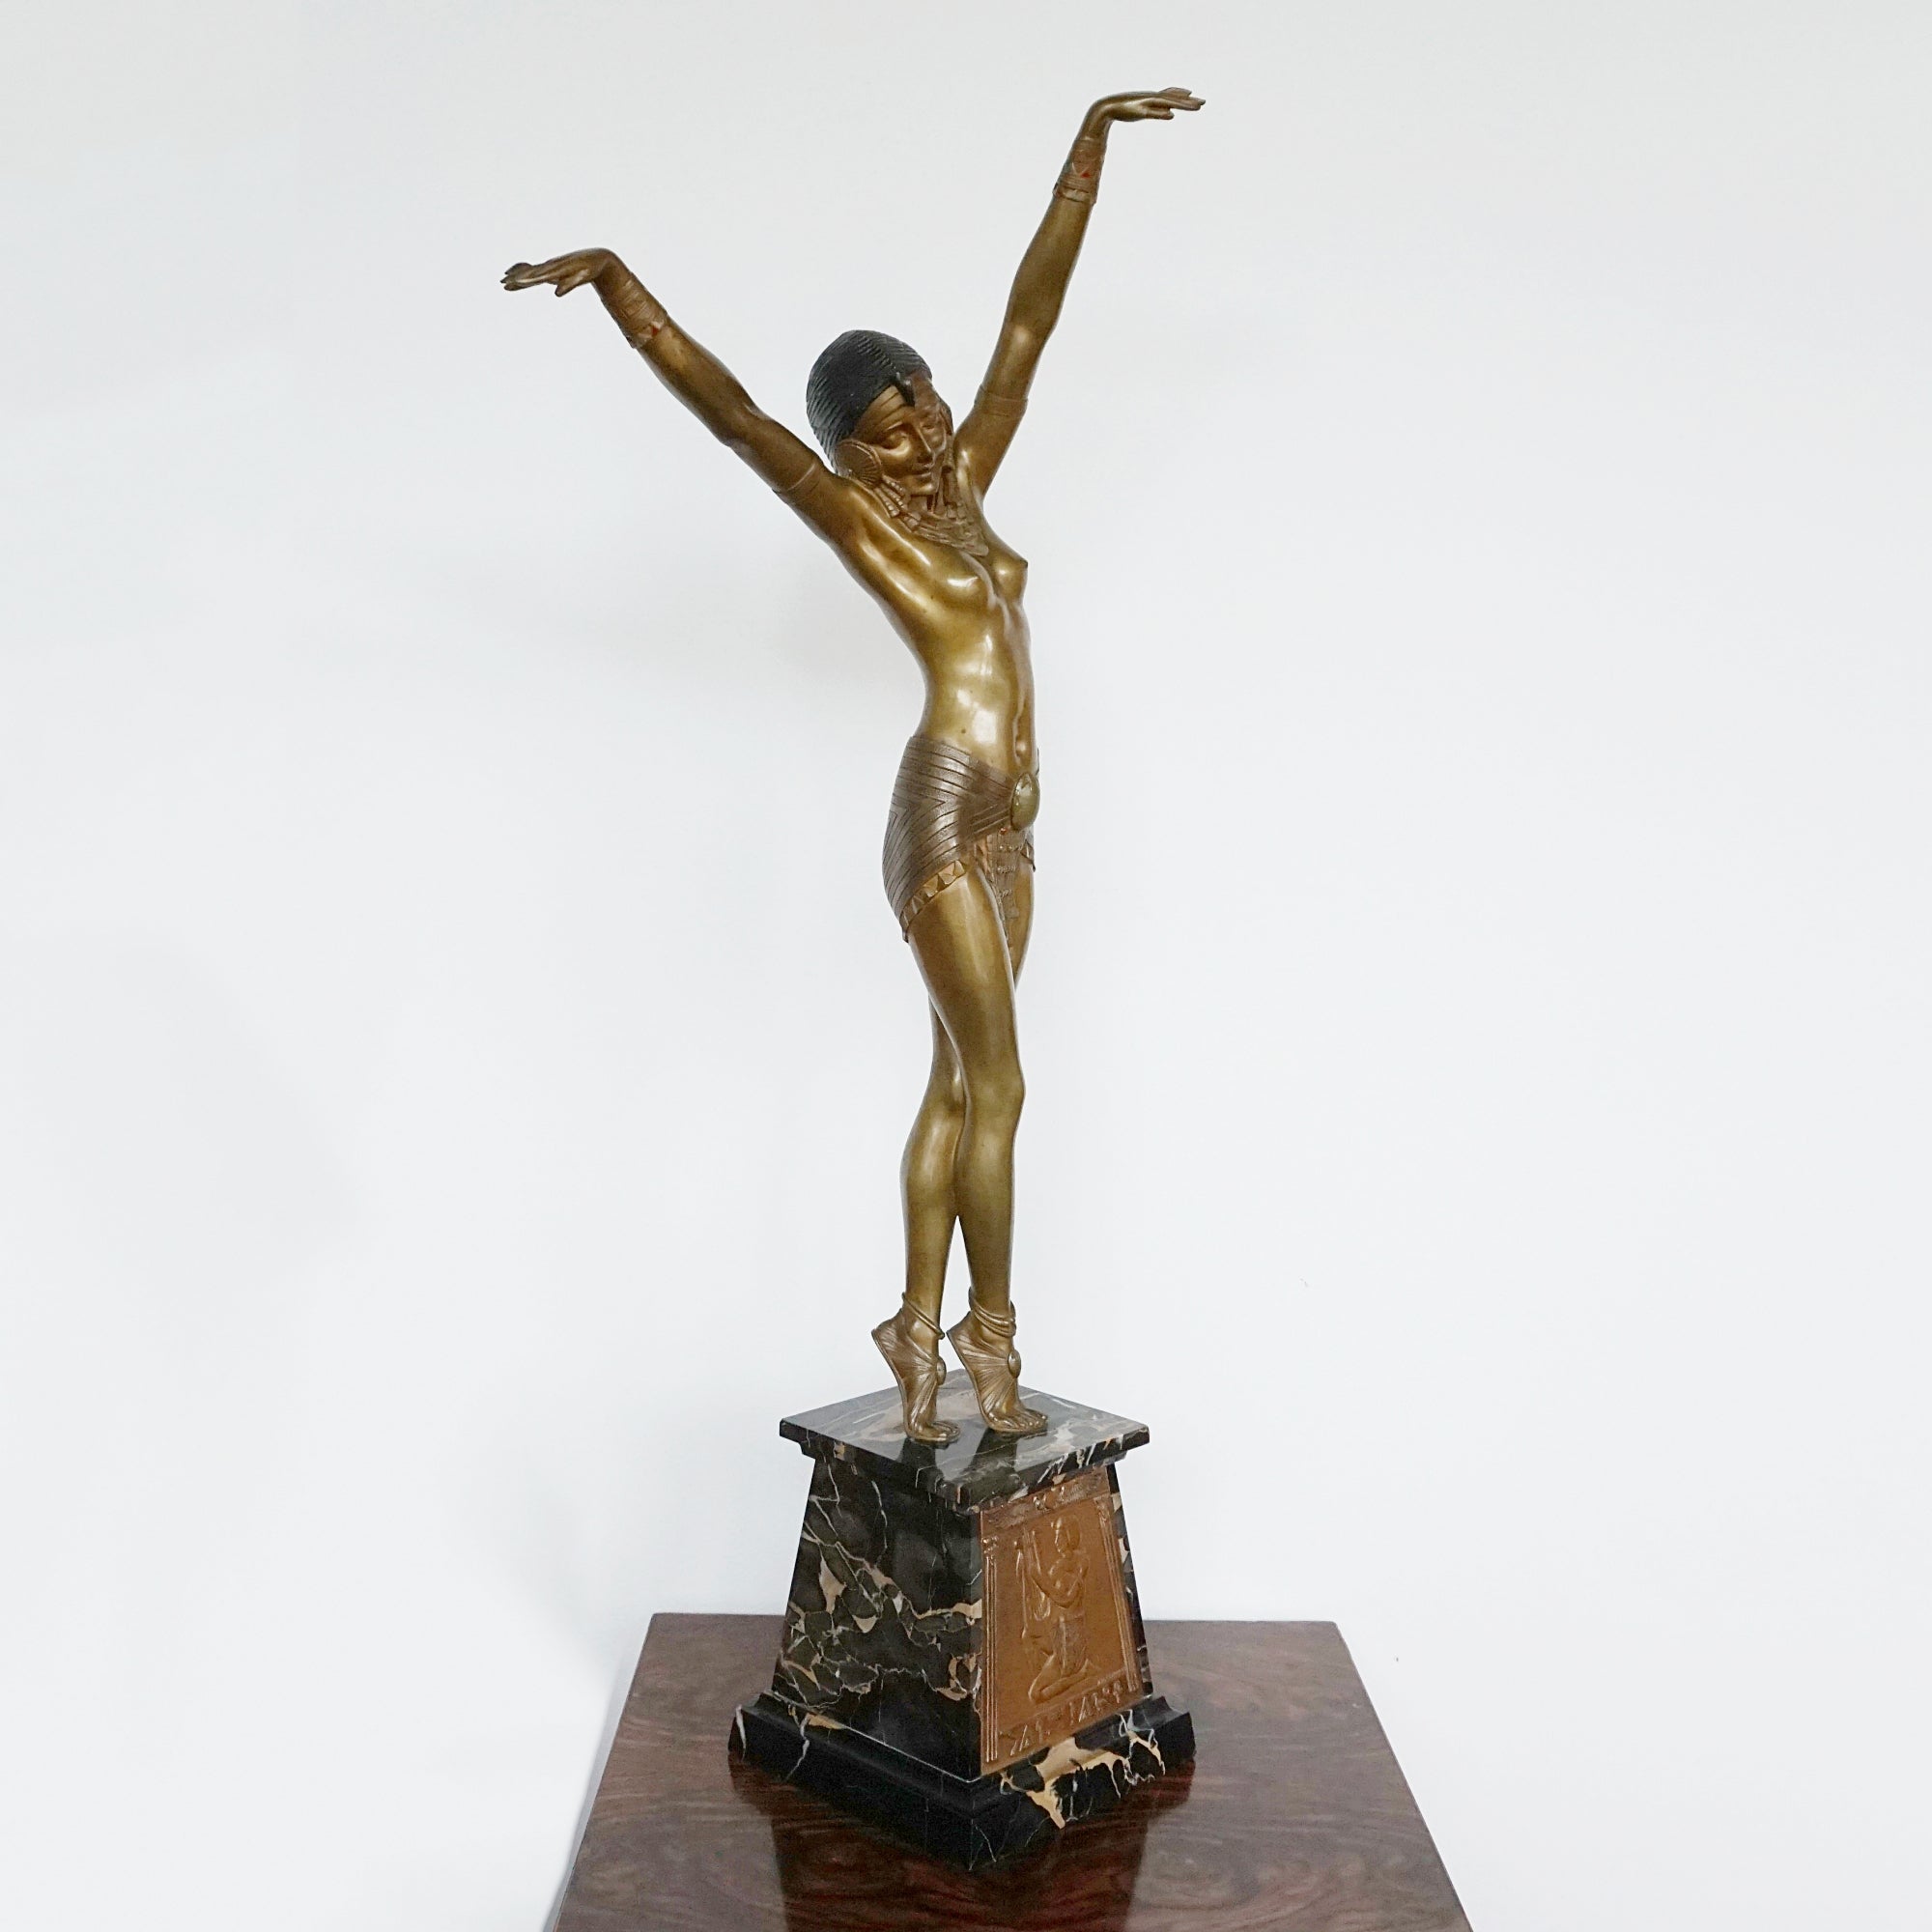 'Egyptian Dancer' by Demetre Chiparus. A cold painted bronze sculpture of a dancer dressed in Egyptian style scantily clad costume with her arms outstretched. Set over a marble base with front plaque. Signed 'D H. Chiparus' to base and plaque.